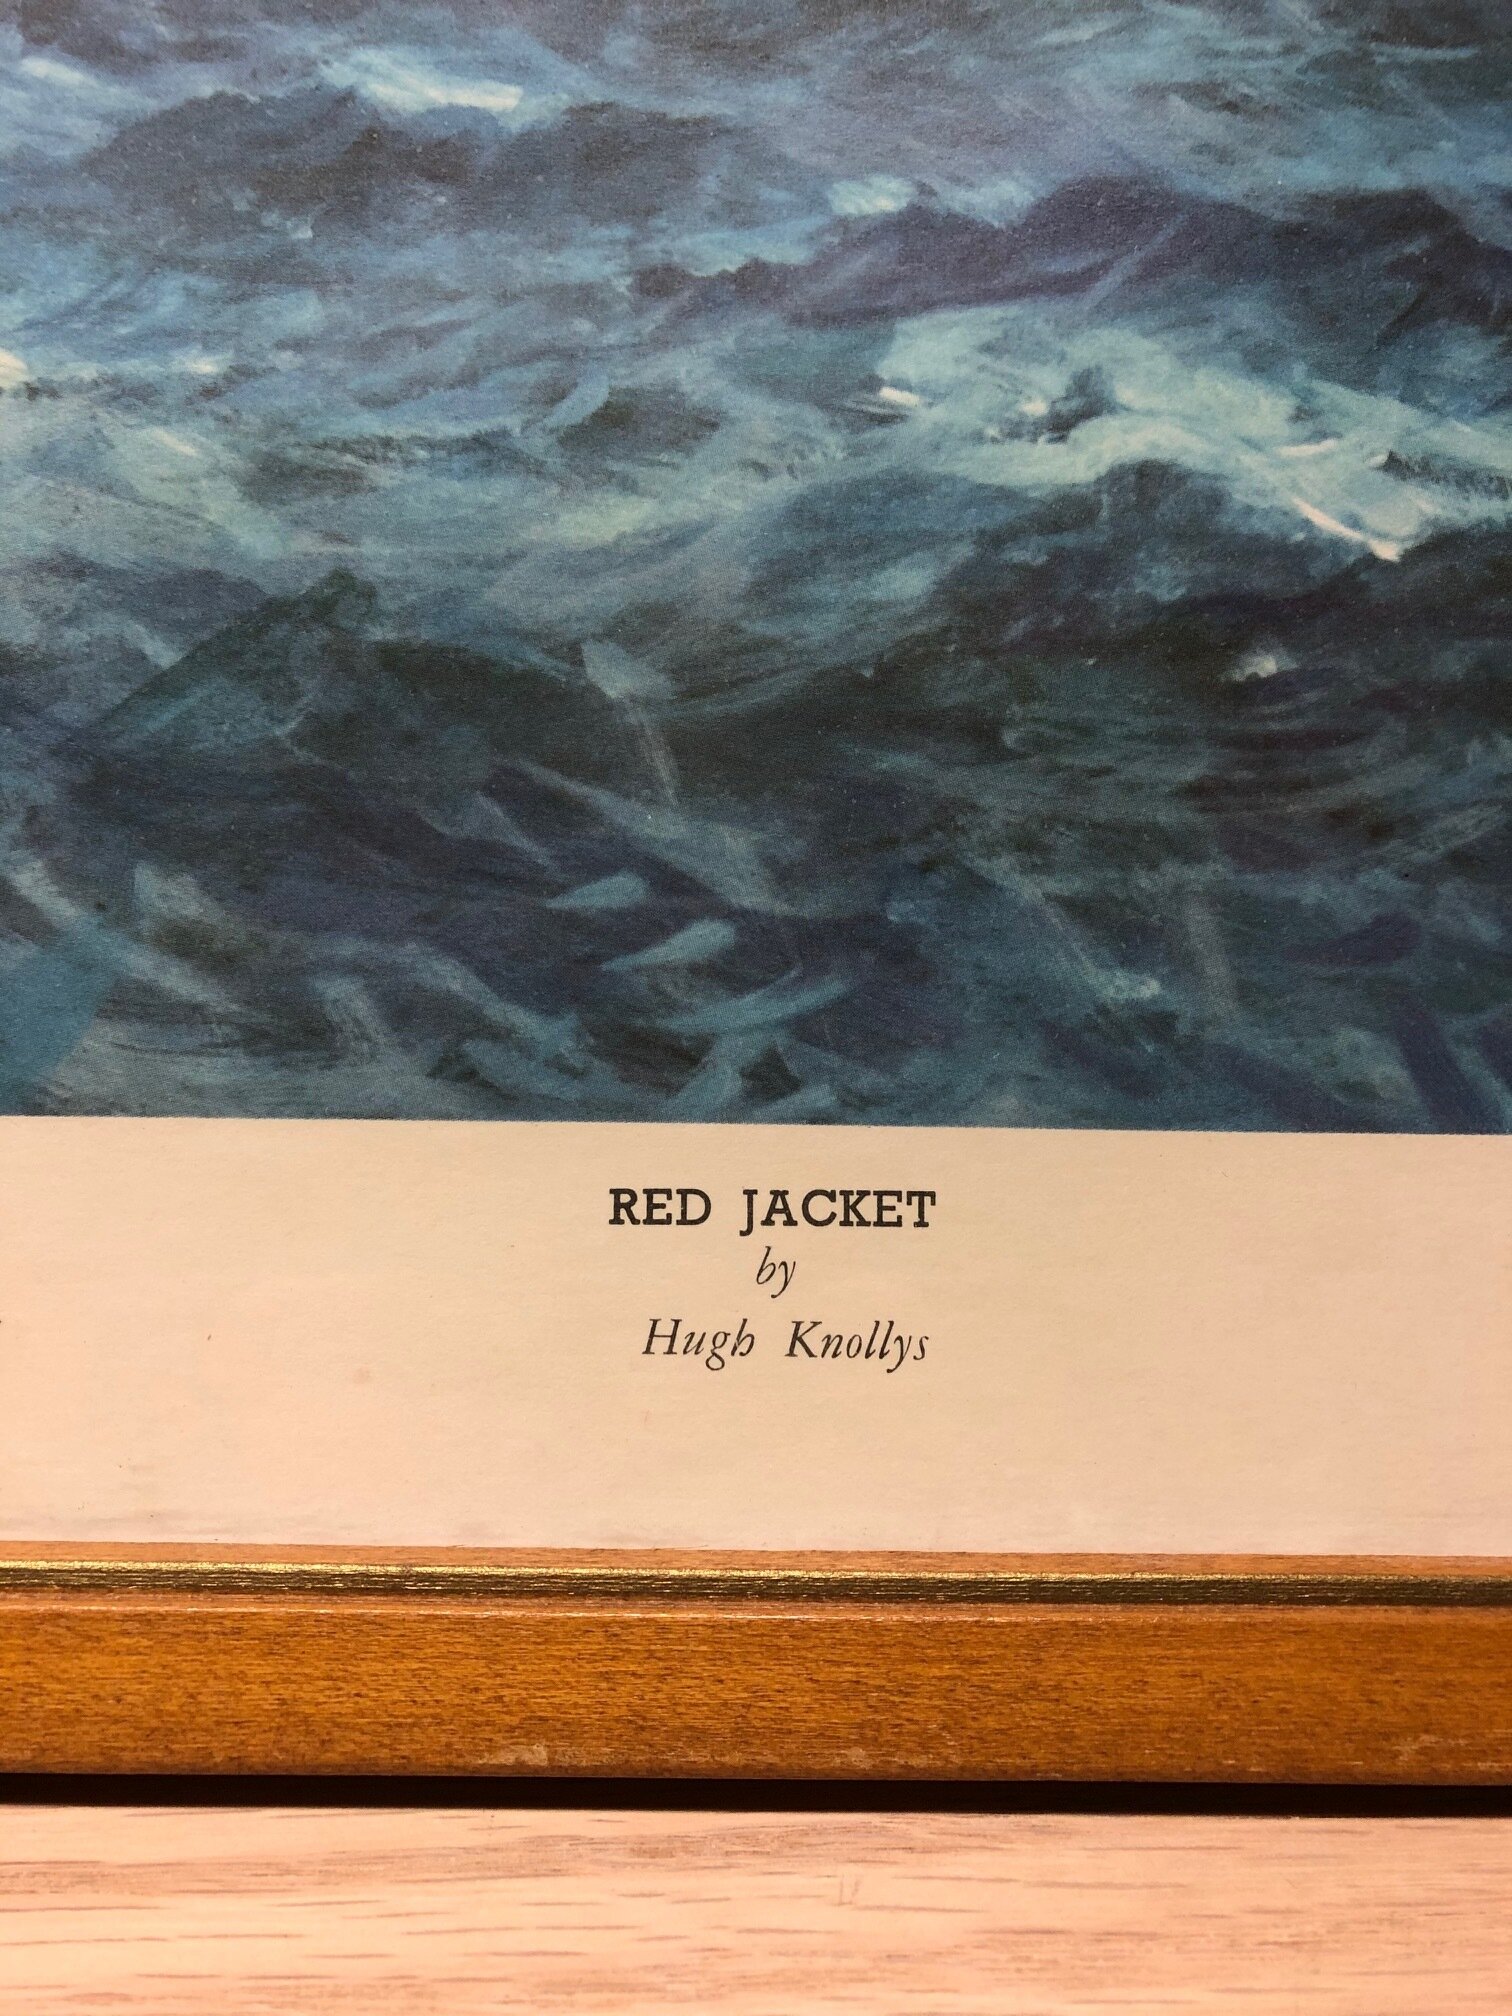 Red Jacket by Hugh Knolleys